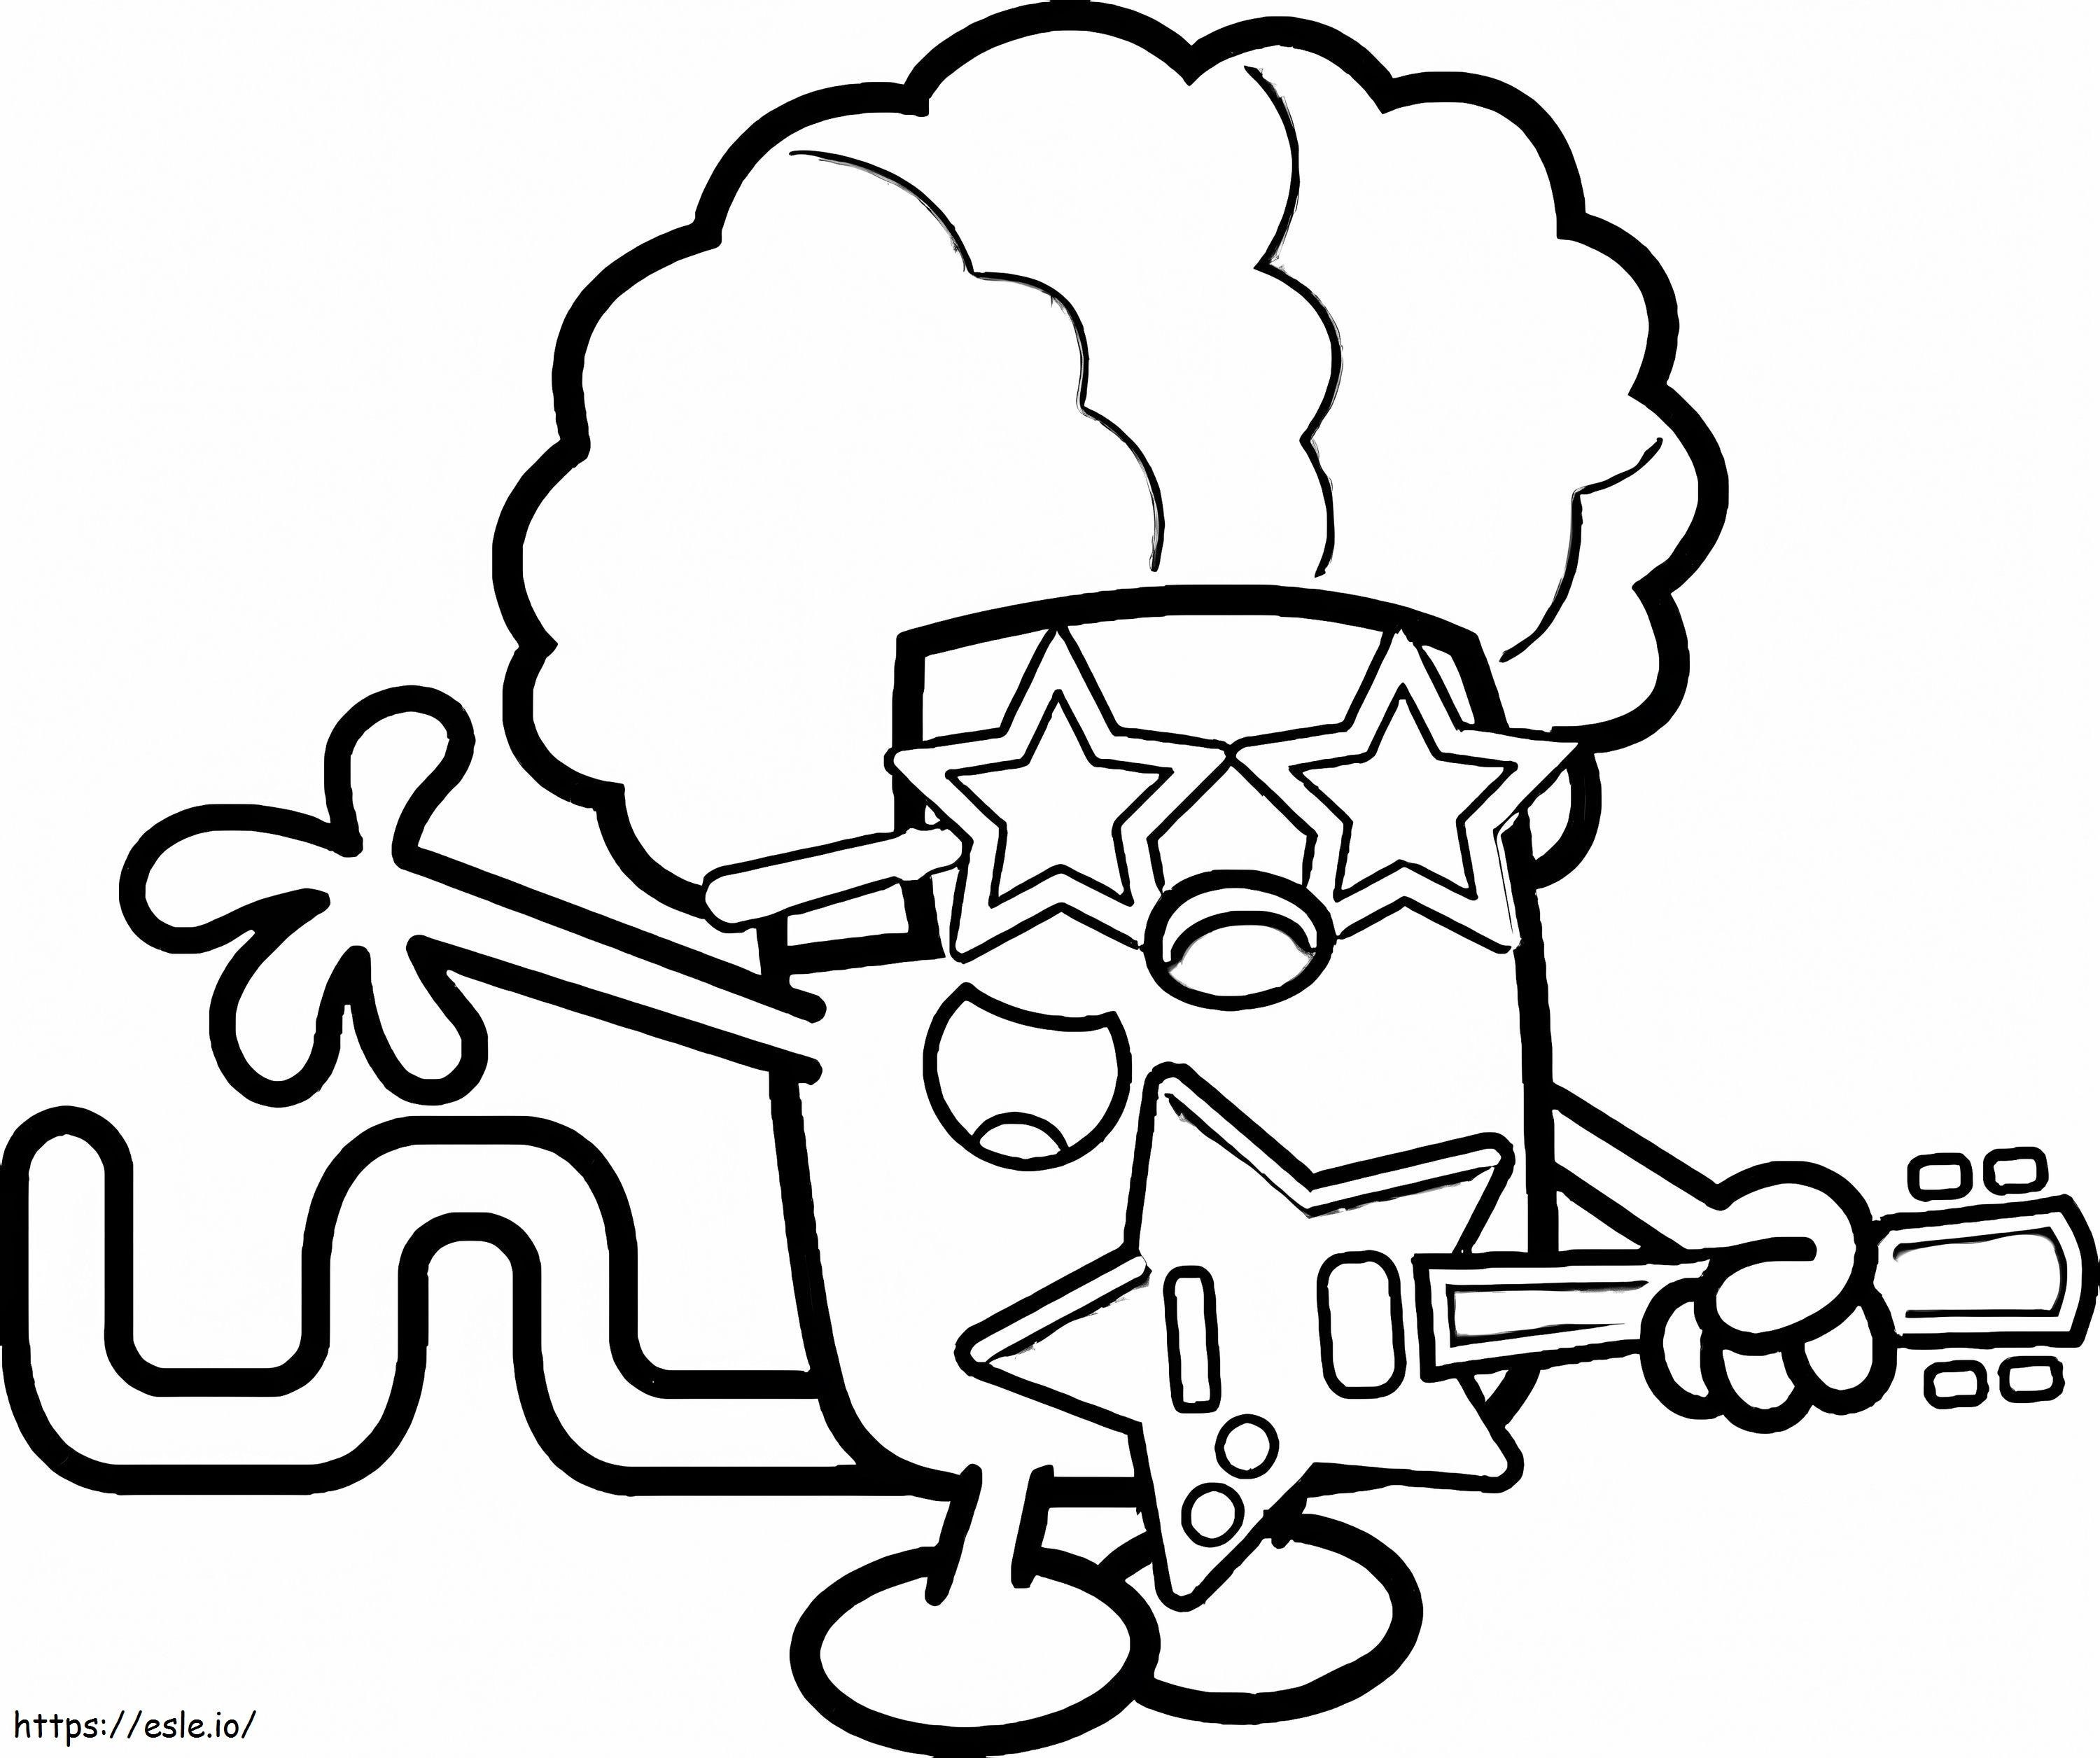 Cool Wubbzy coloring page